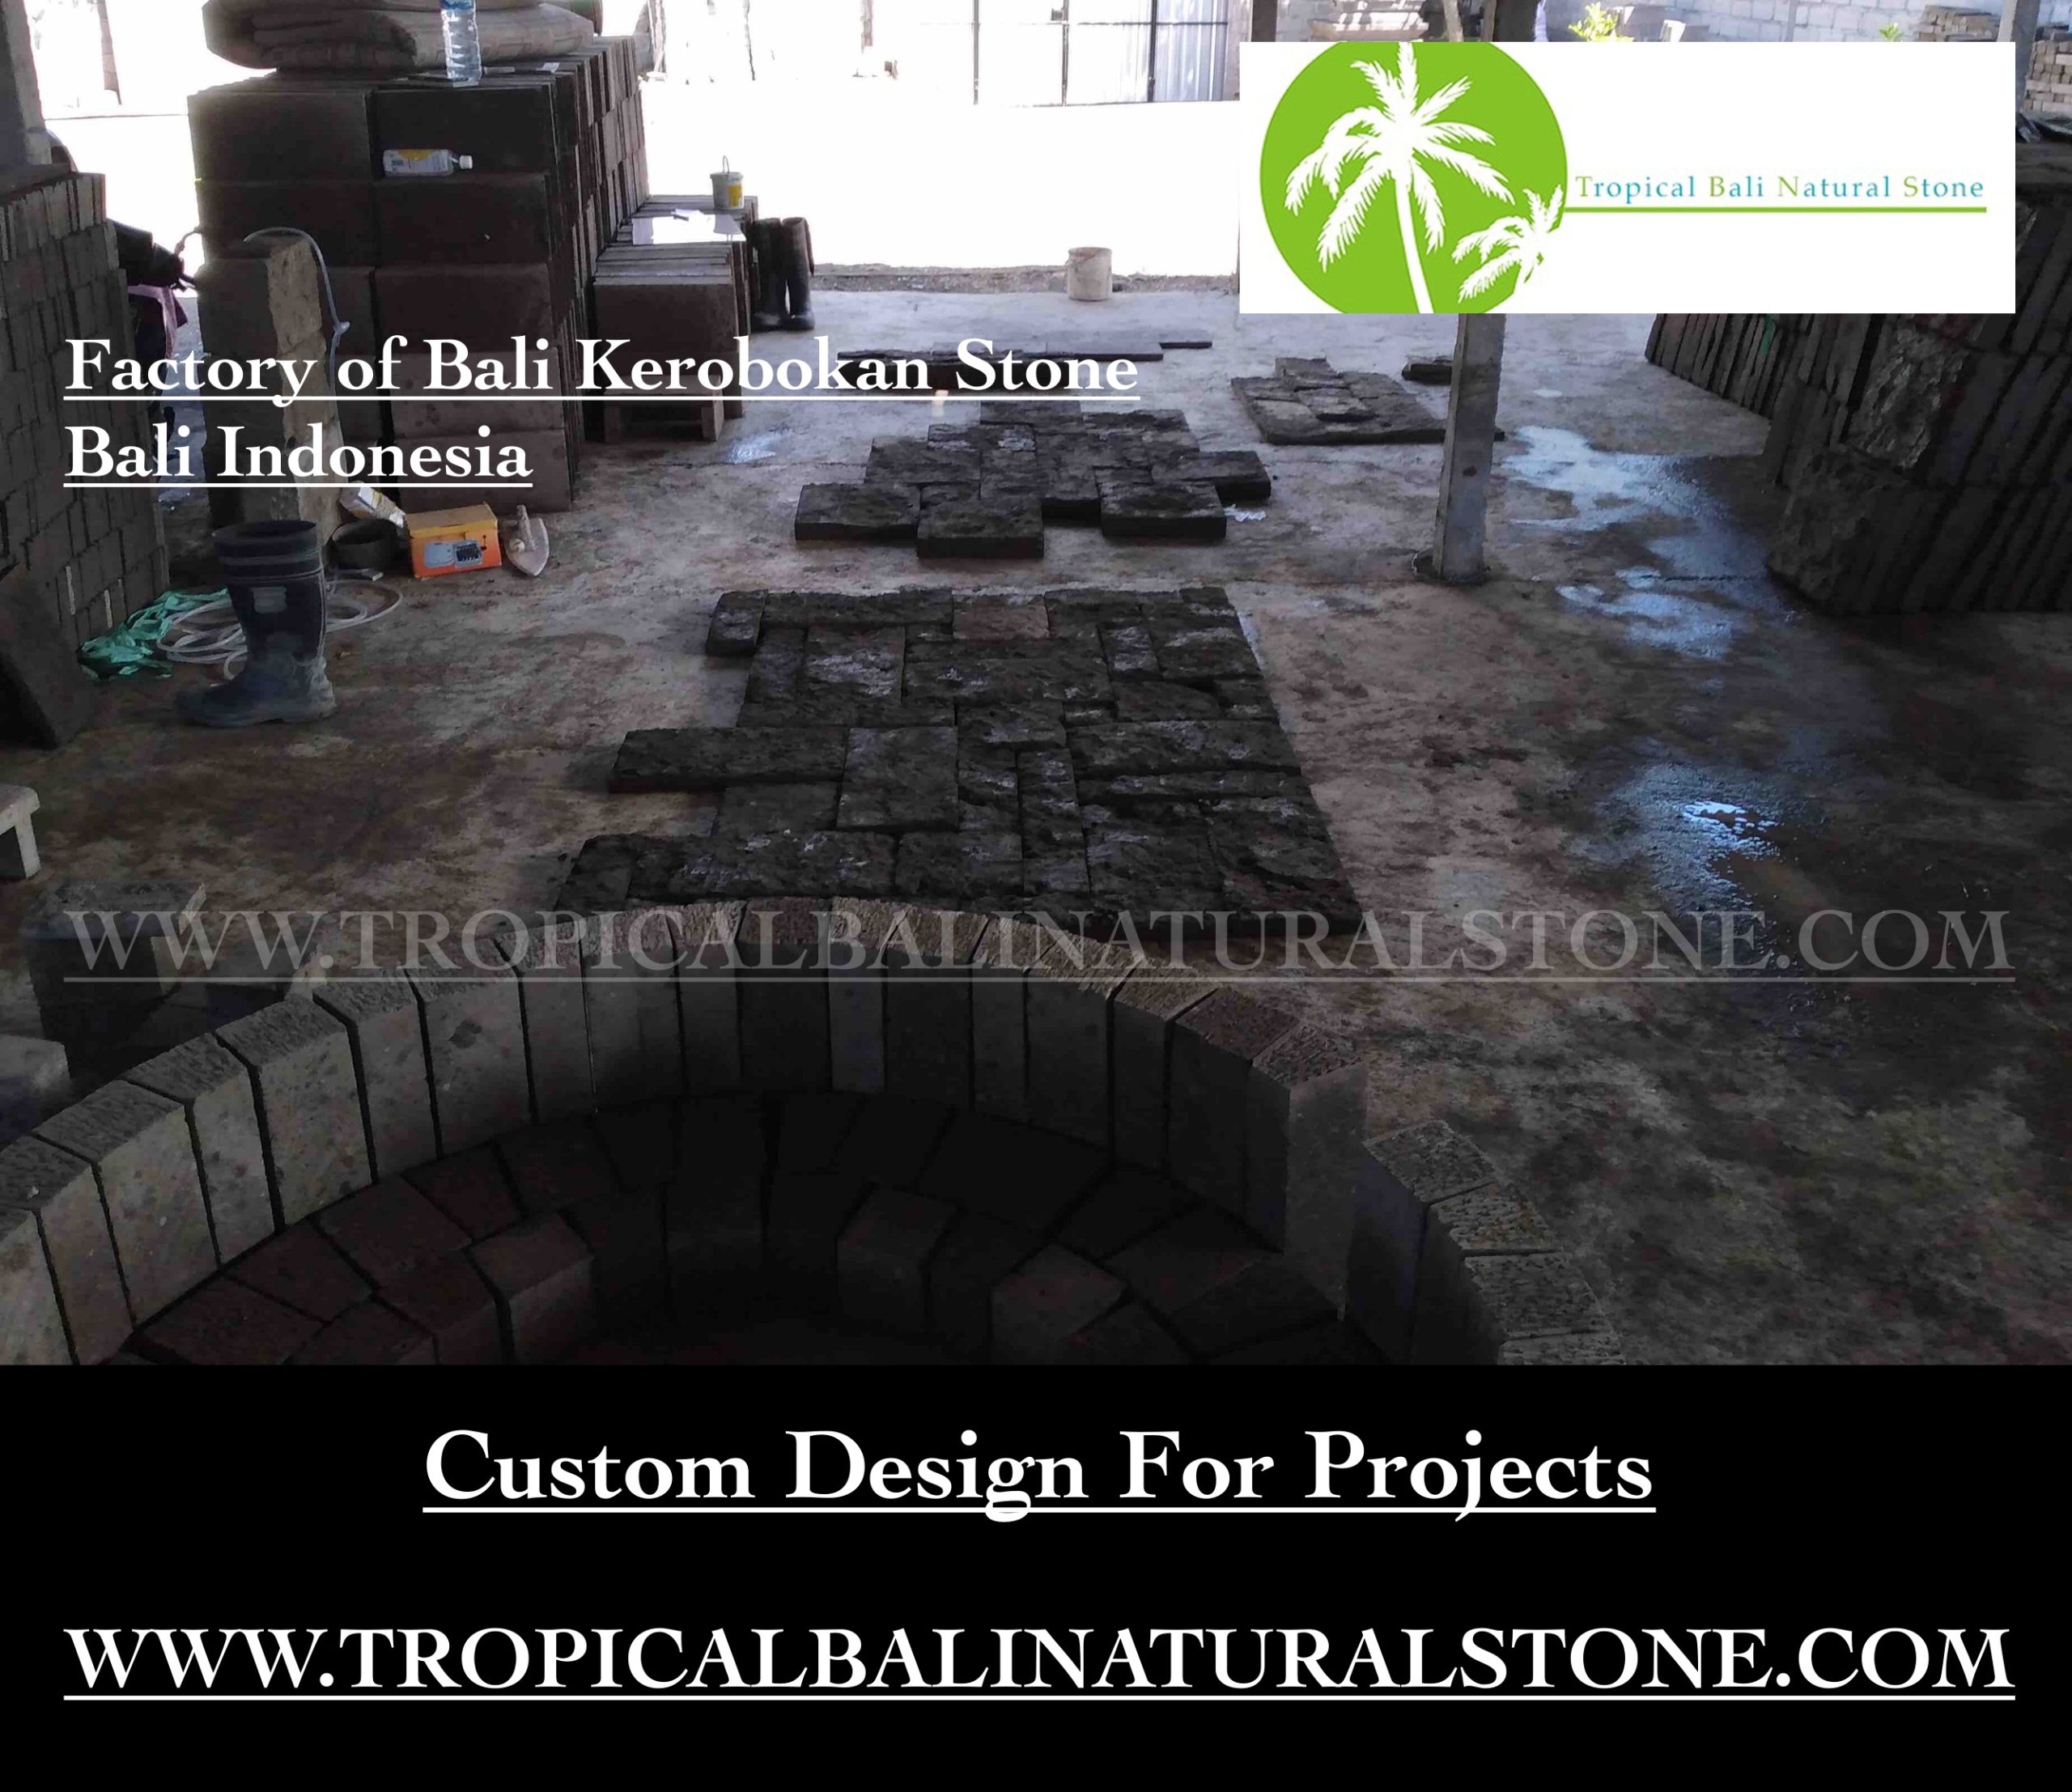 Quality control area ensuring the excellence of Bali Kerobokan stone before distribution.